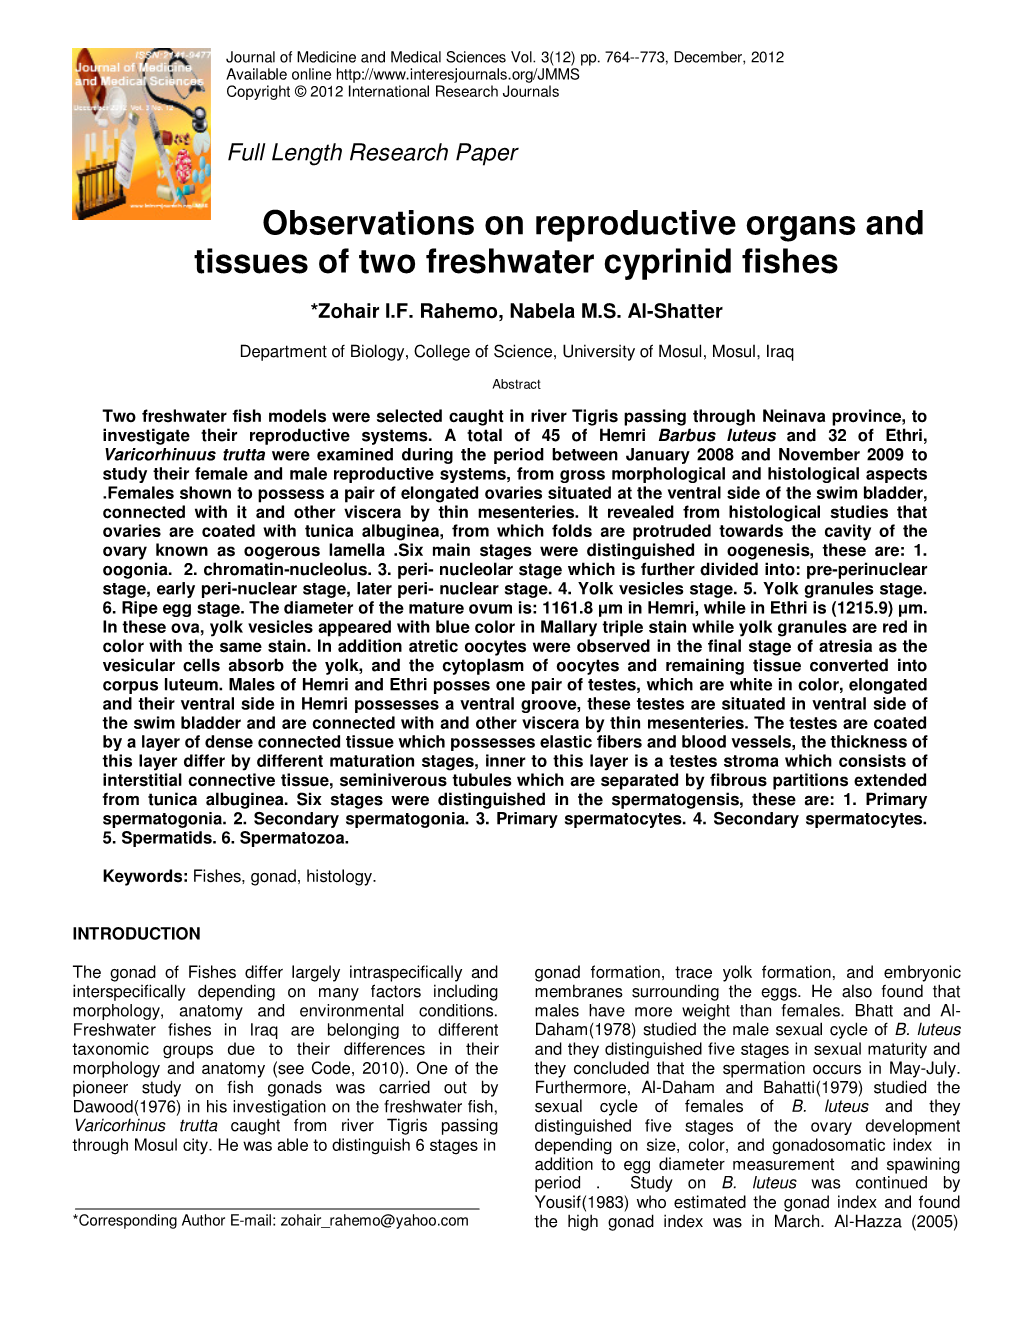 Observations on Reproductive Organs and Tissues of Two Freshwater Cyprinid Fishes